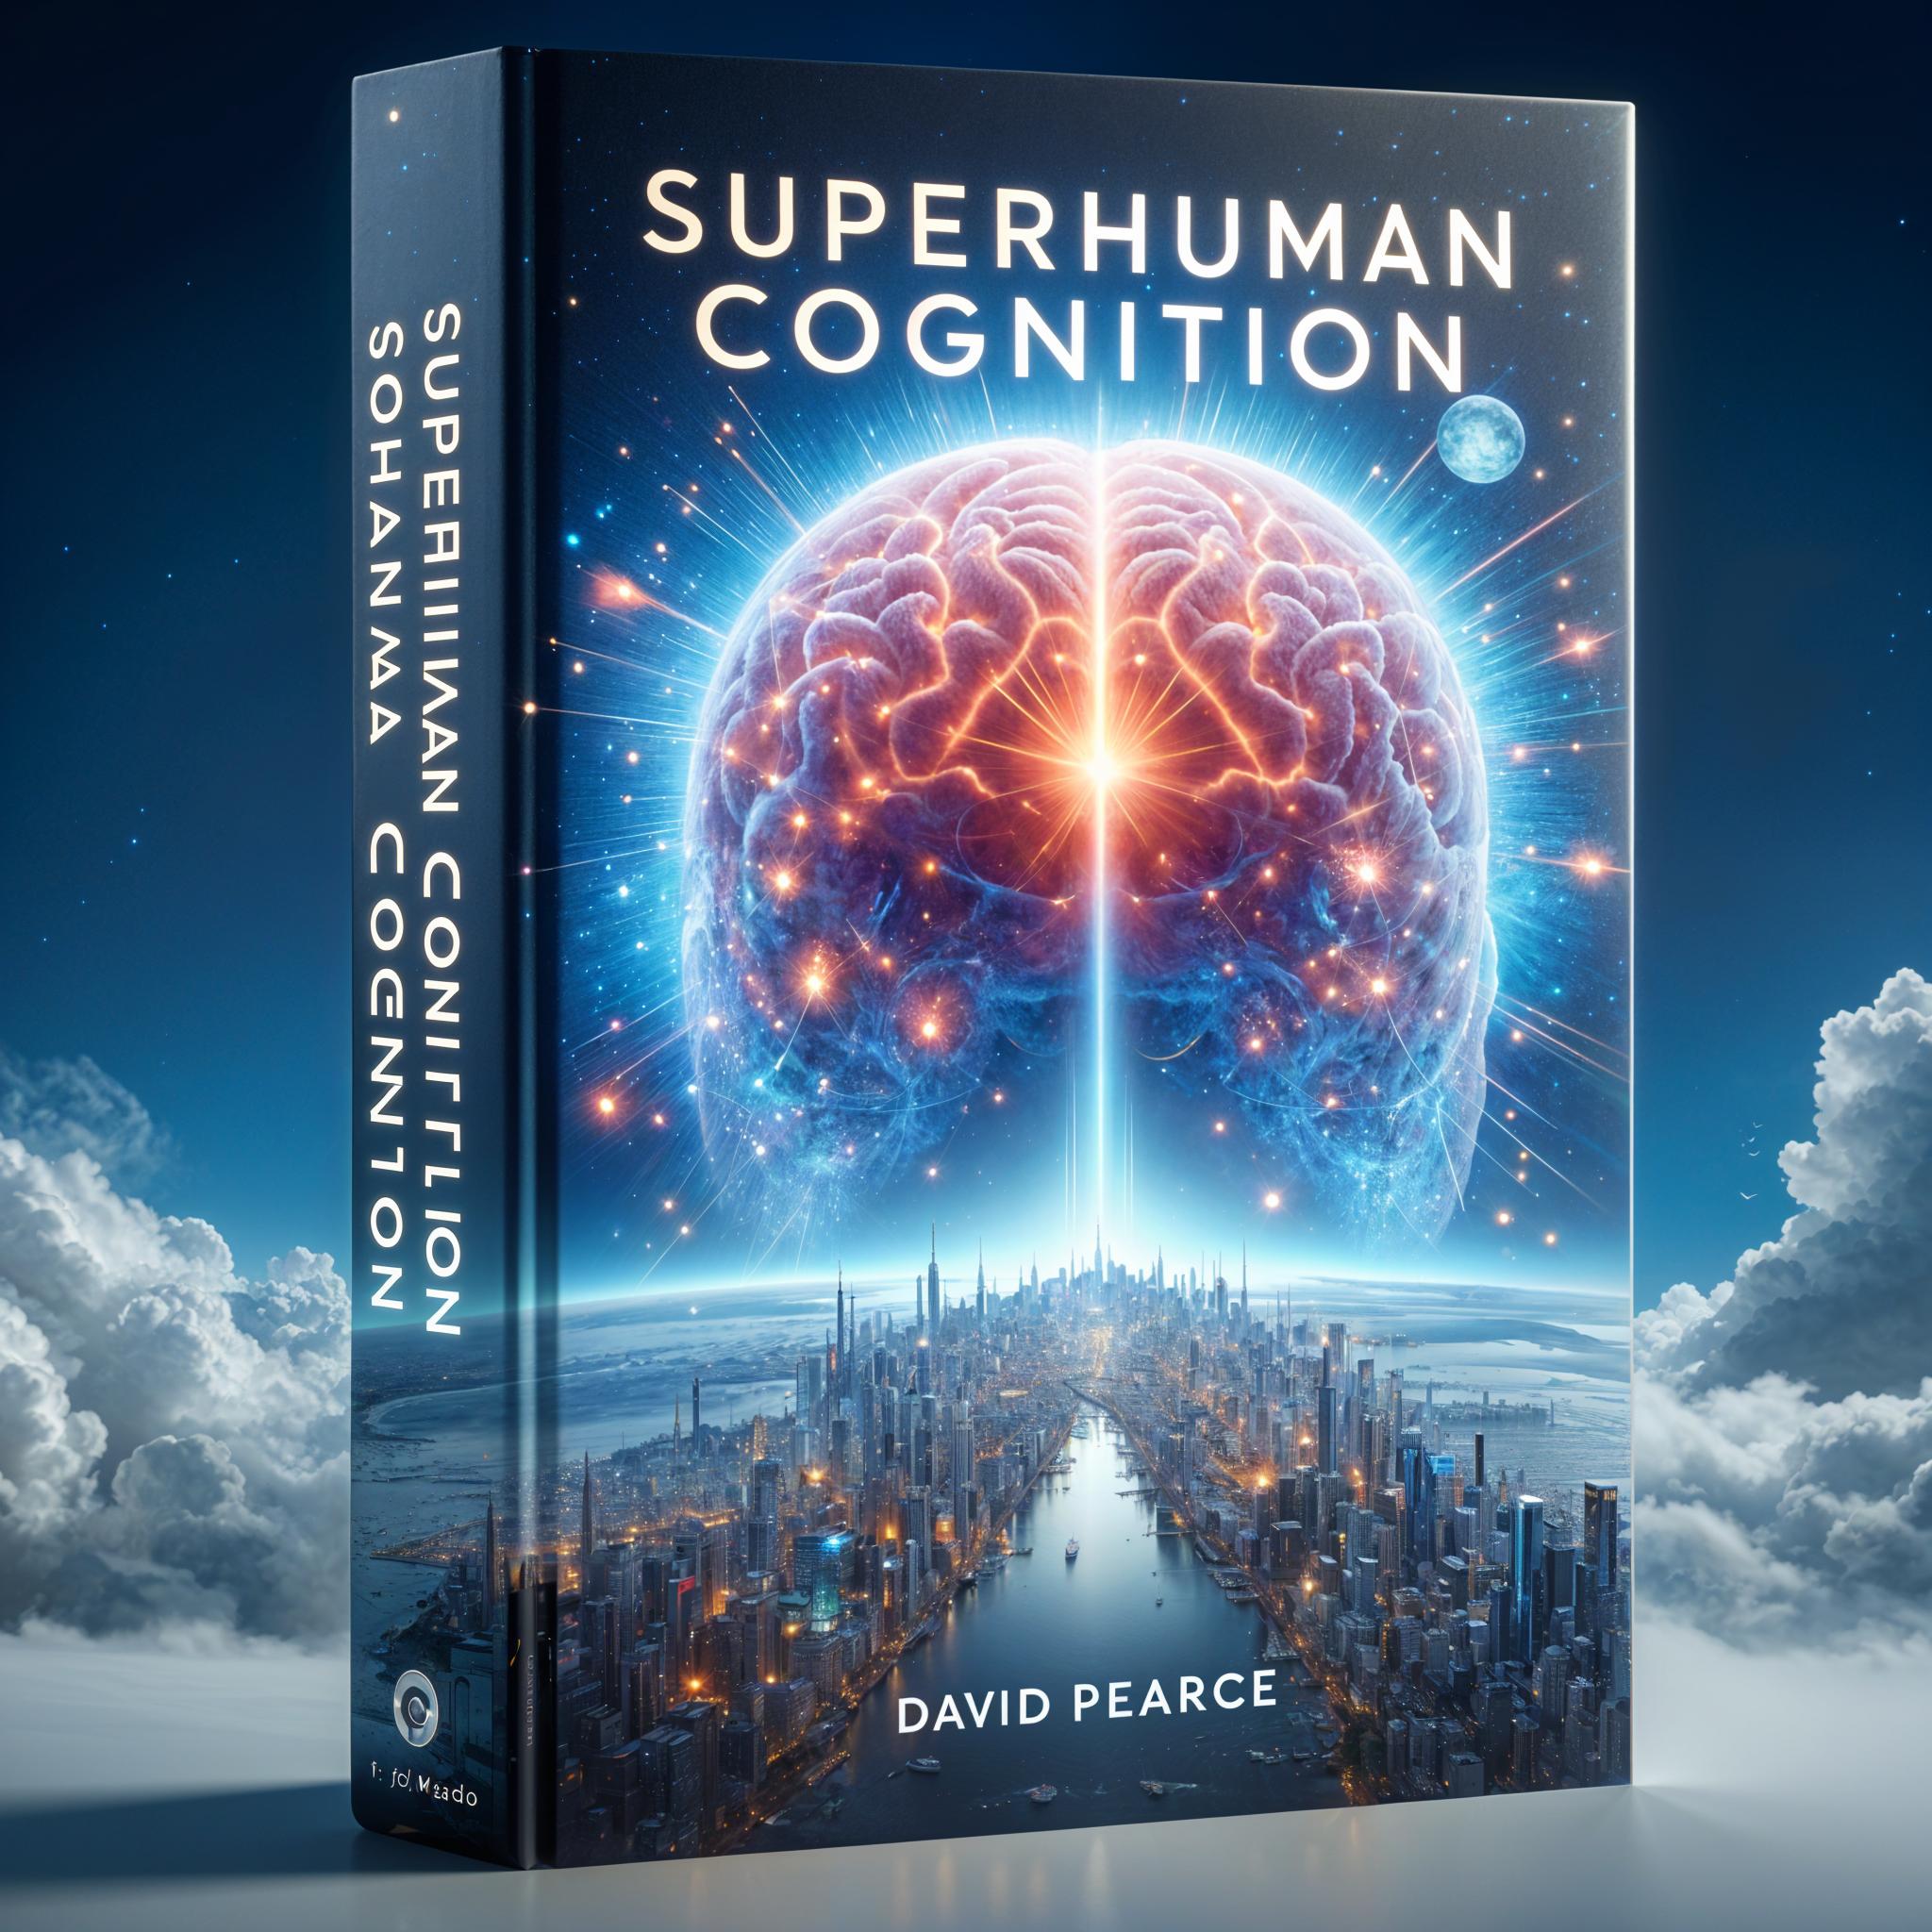 Superhuman Cognition by David Pearce